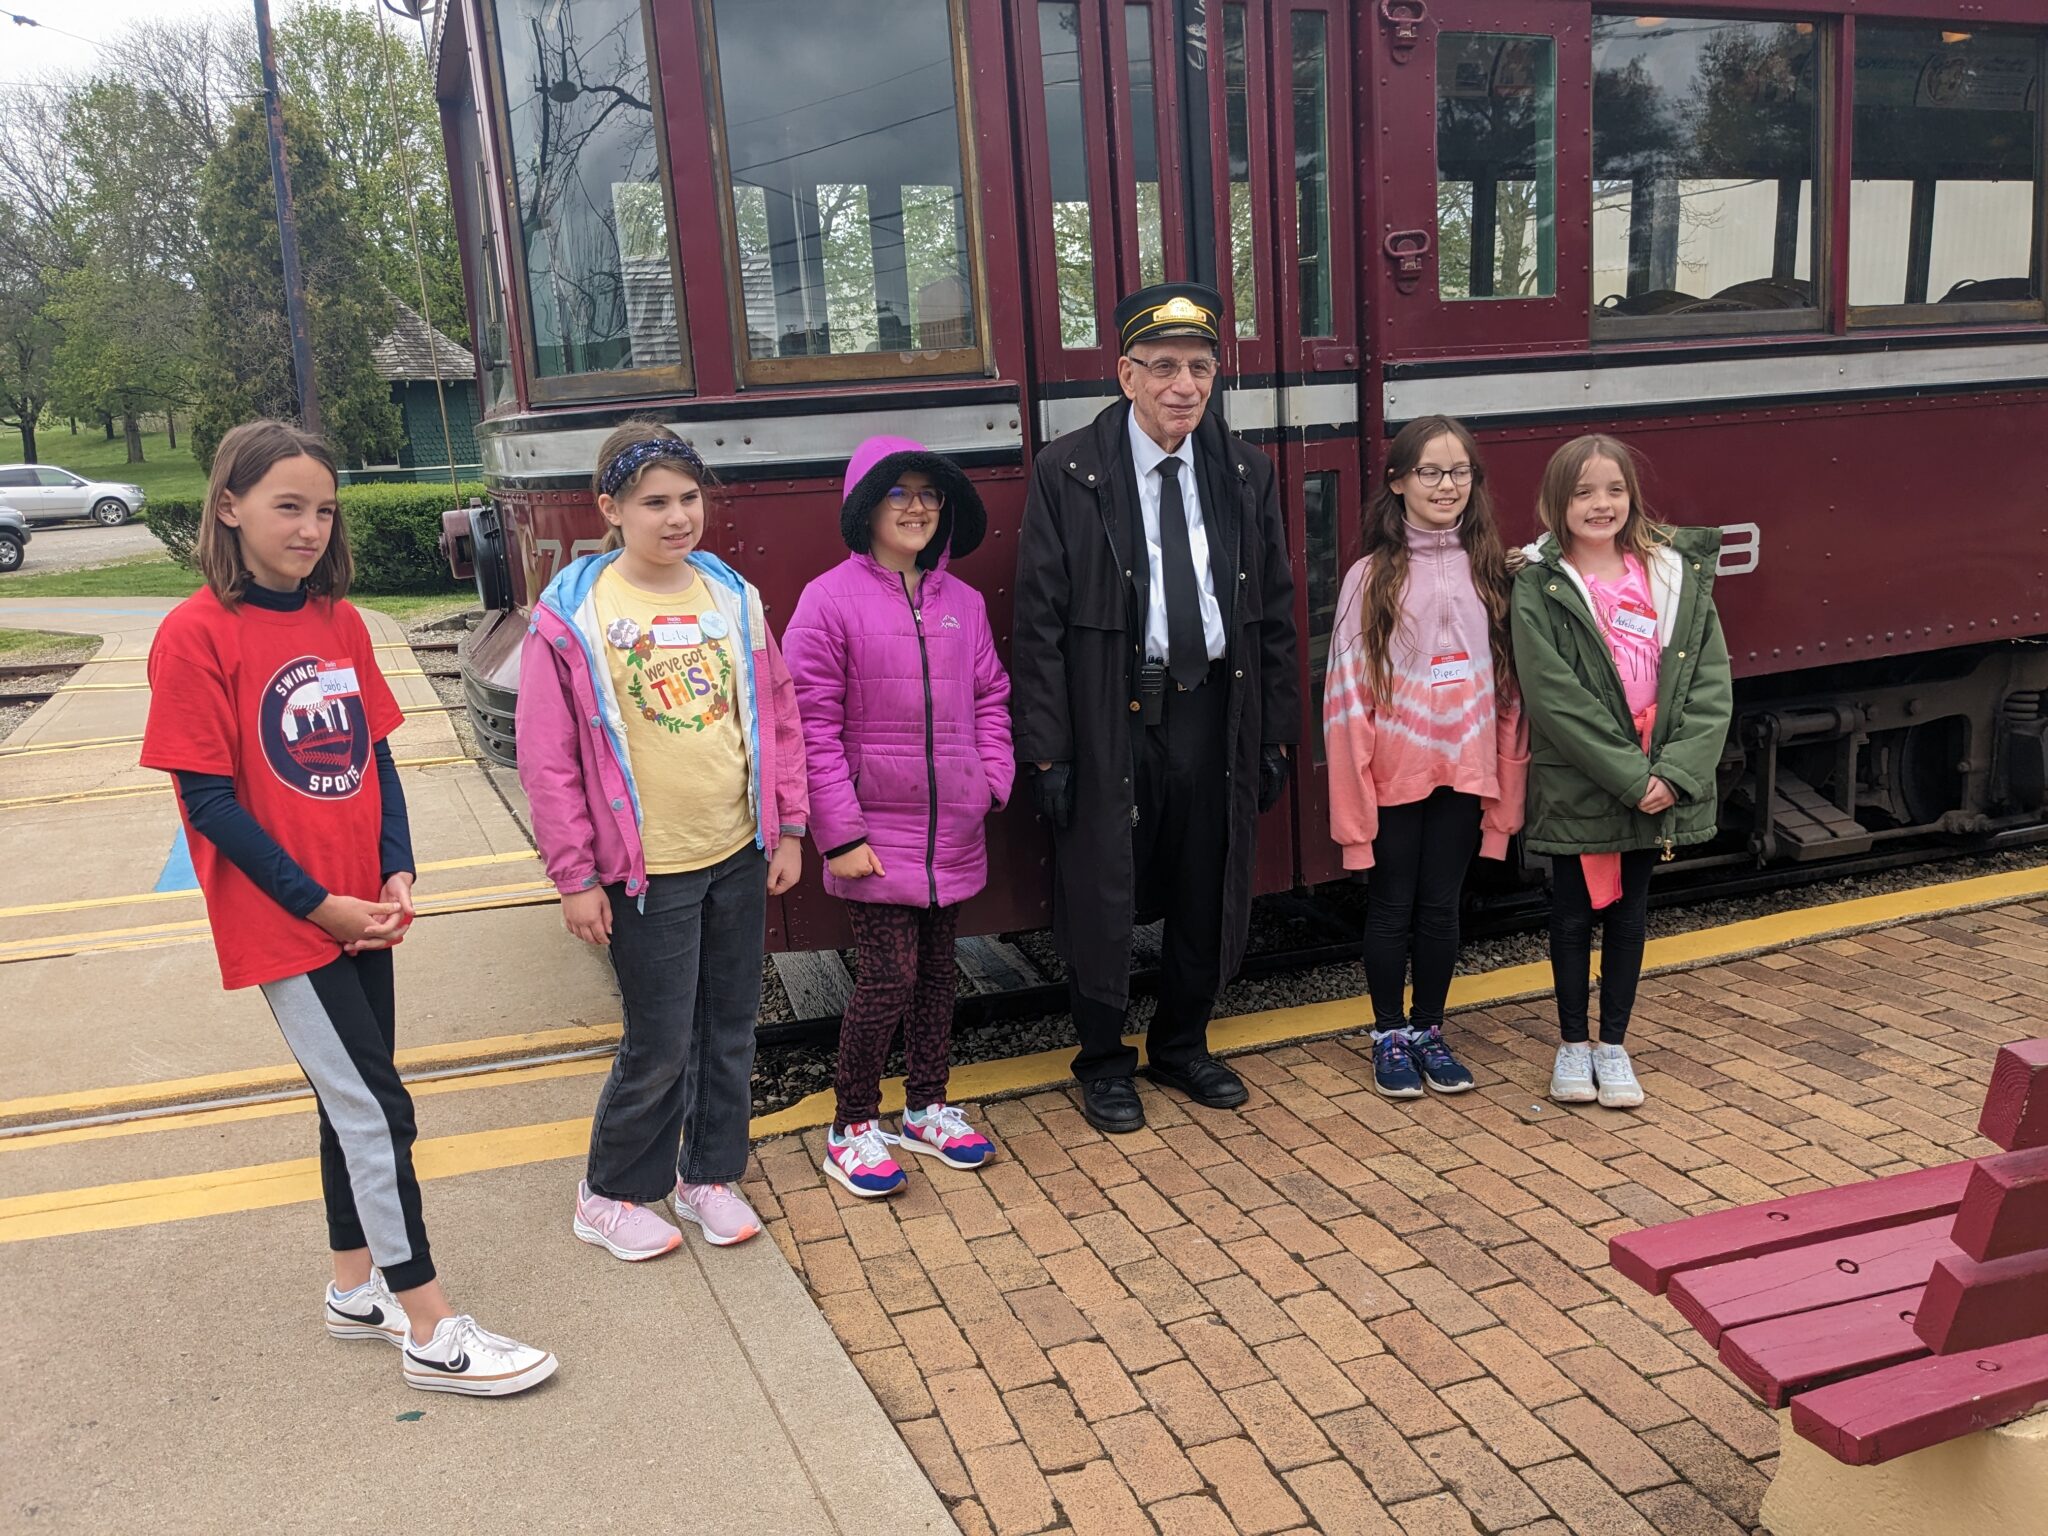 A group of girl scouts take a picture with their operator and trolley.